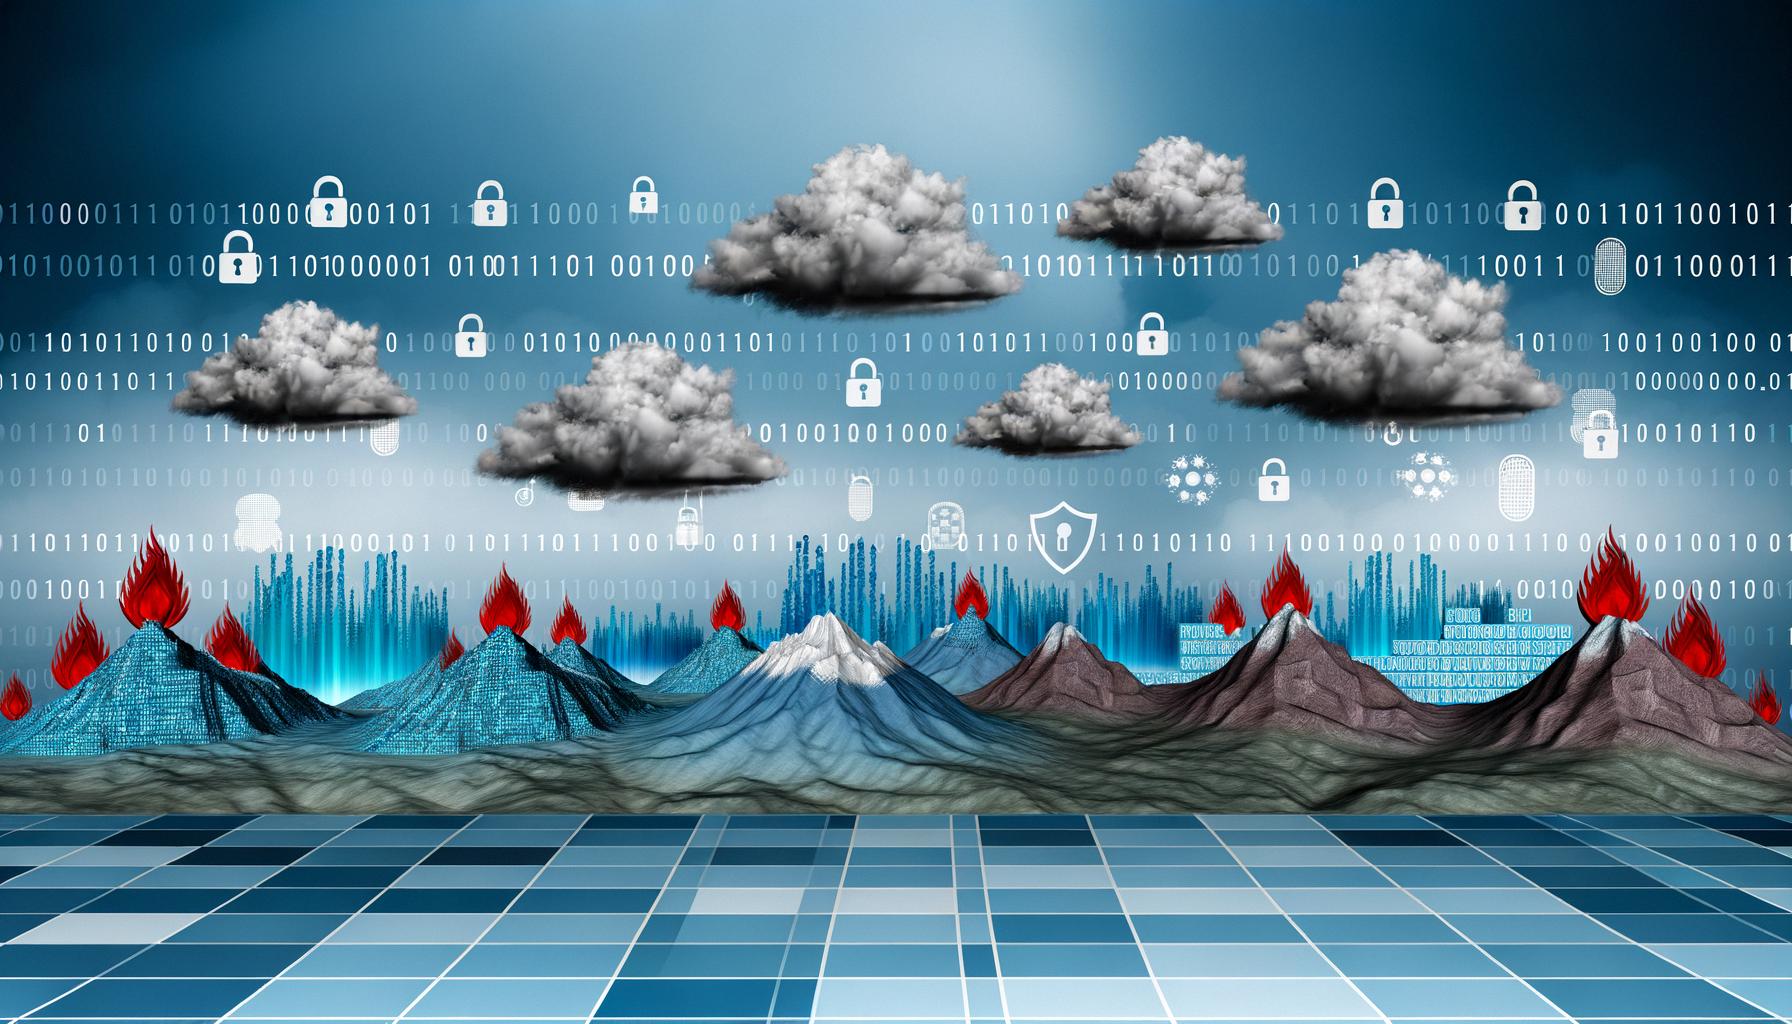 Cybersecurity threats evolve, growing more sophisticated despite increased defensive measures.